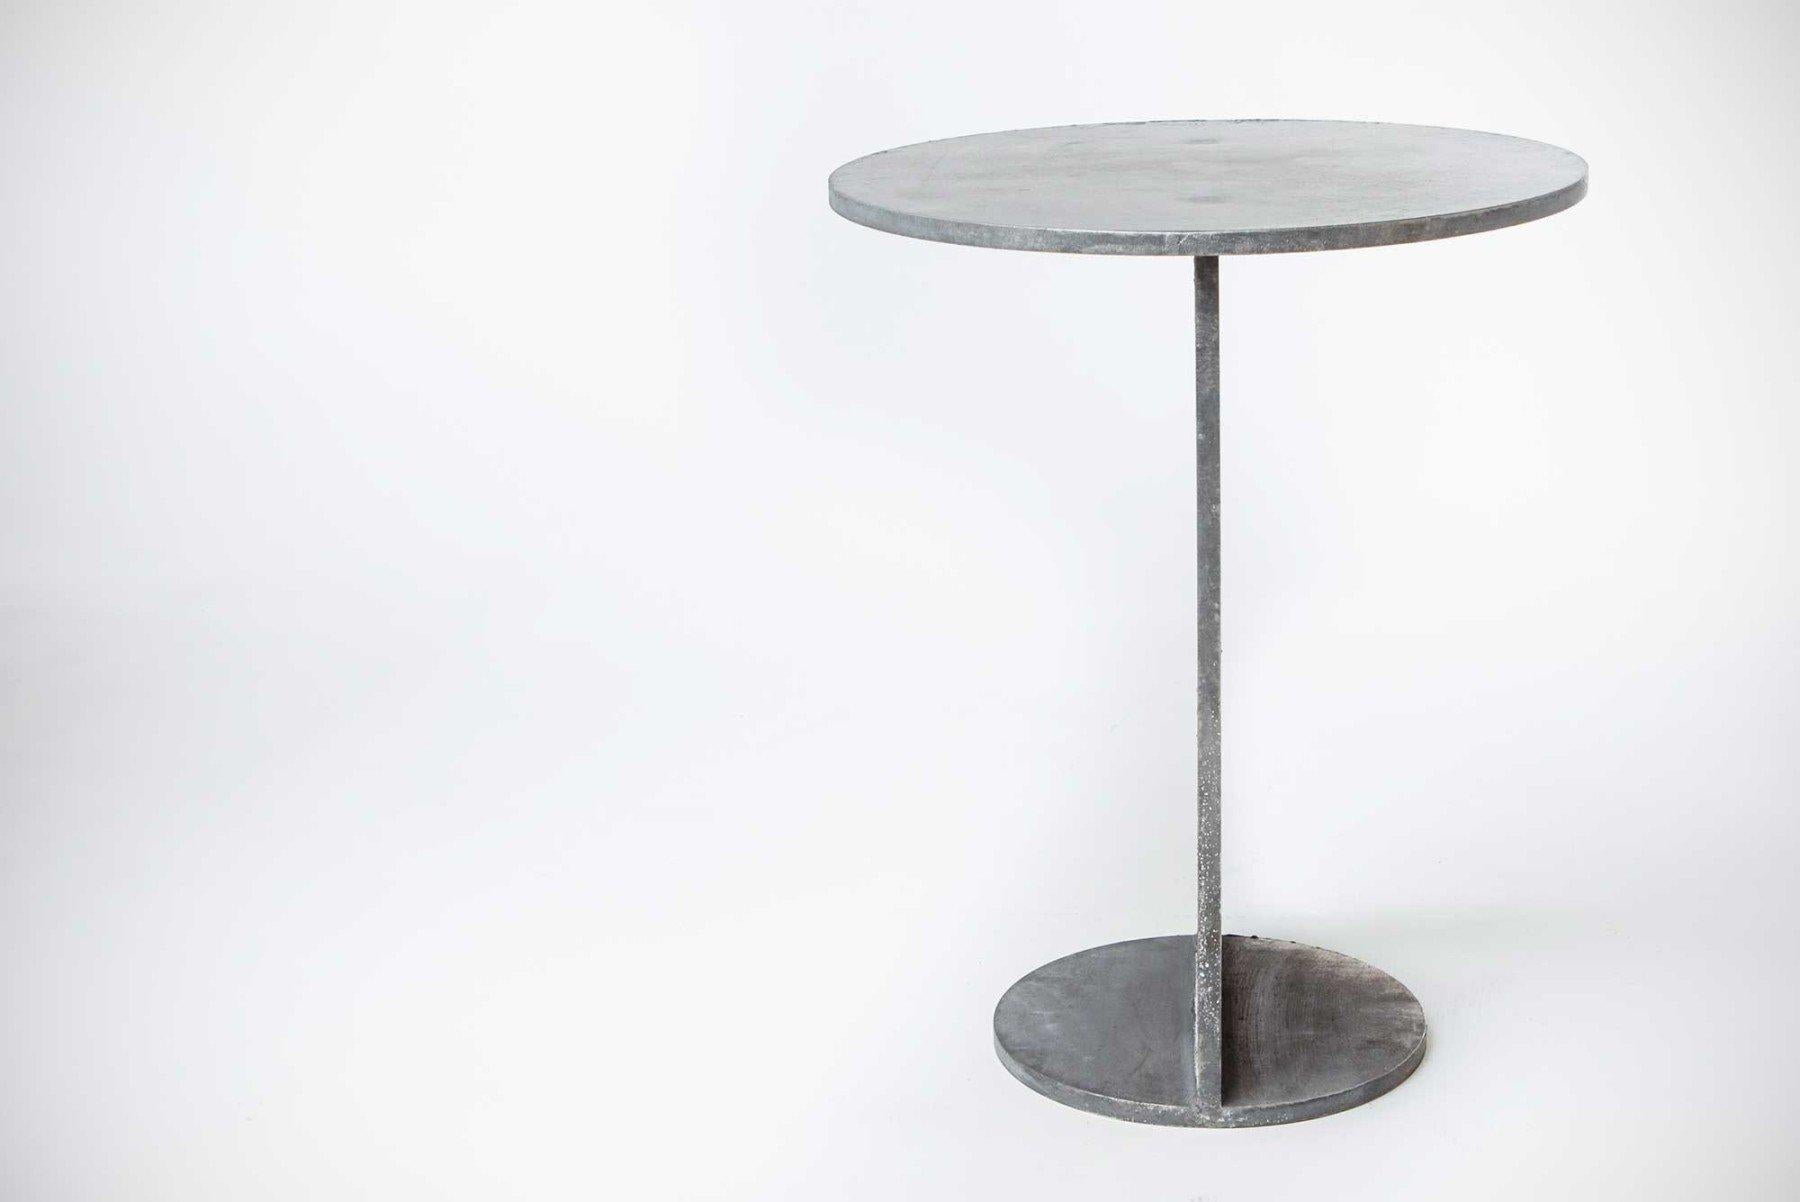 Eero table in hot-dipped galvanized steel. A minimal design in half-inch plate steel with a durable coating of molten zinc. Also available in brushed, sanded, or polished finish. Signed, dated and numbered to the underside with a laser-etched